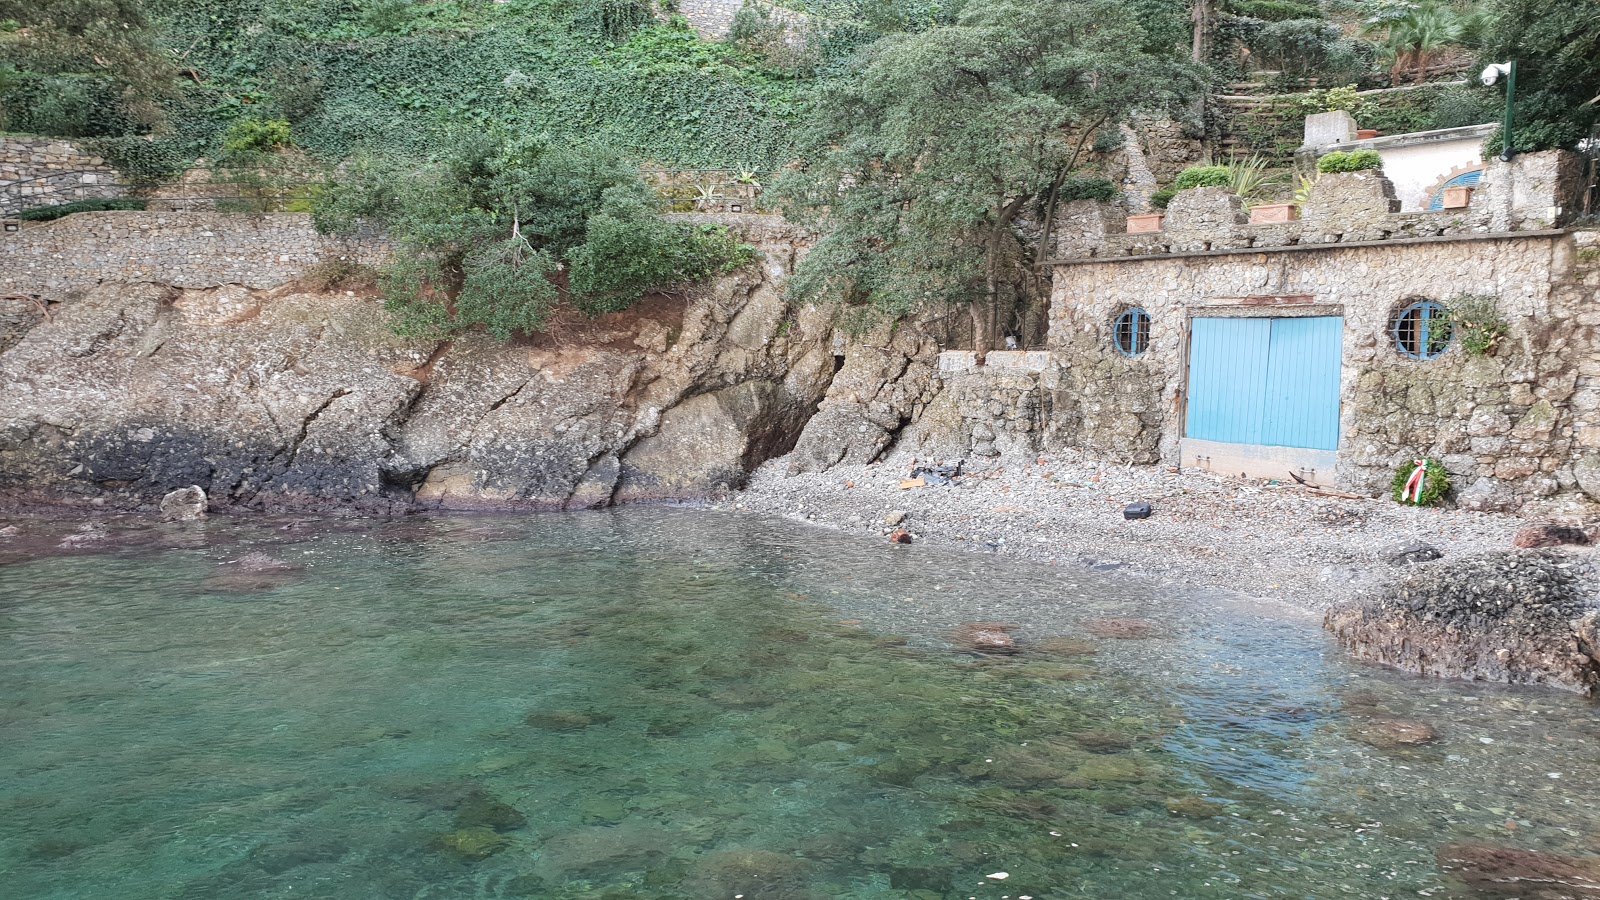 Photo of Spiaggia dell'Olivetta backed by cliffs